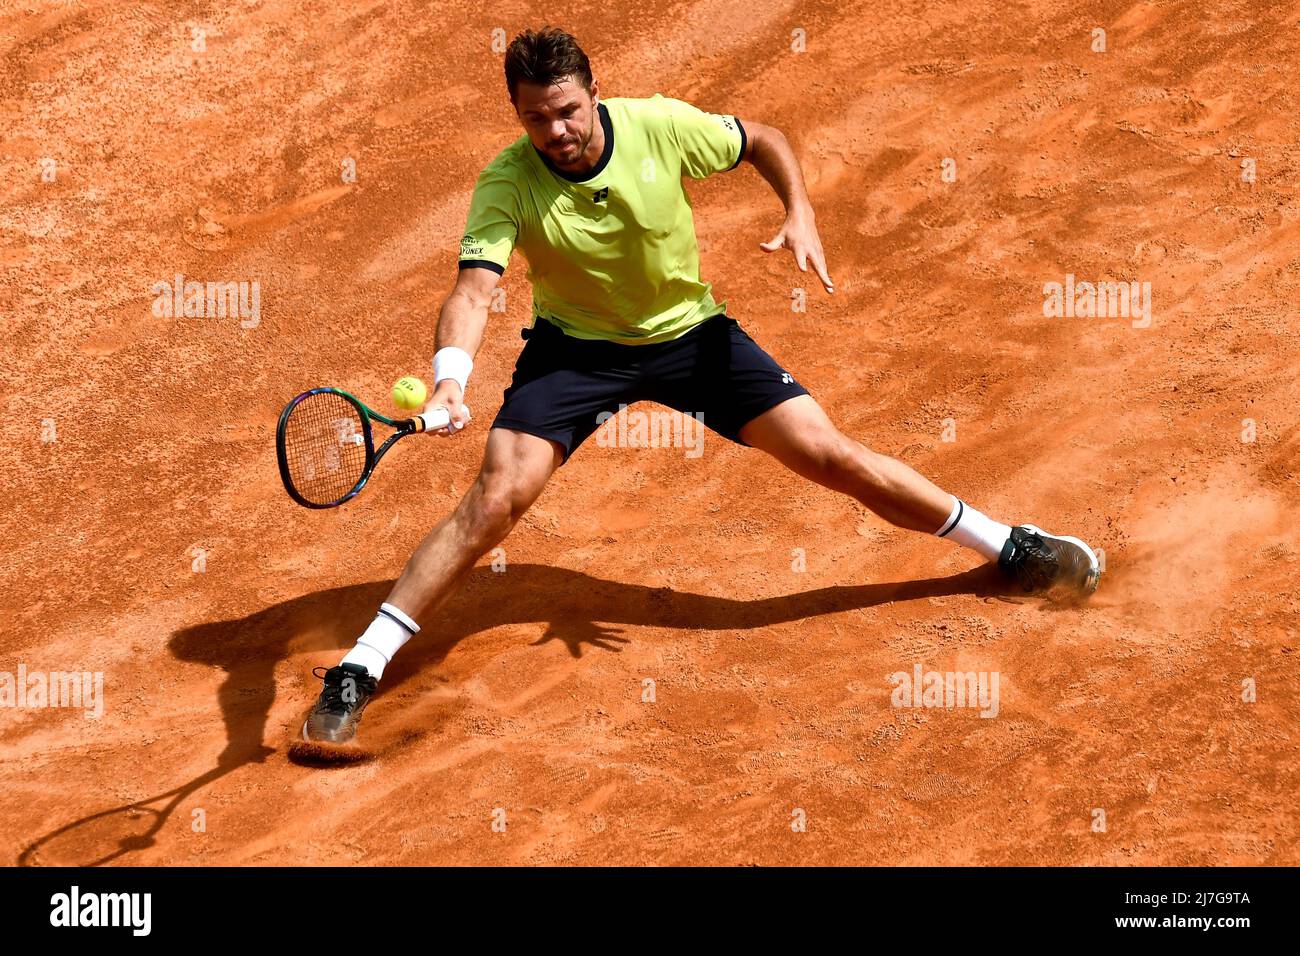 Rome, Italy. 09th May, 2022. Stanislas 'Stan' Wawrinka returns to Reilly  Opelka of United States during their first round match at Tennis  Internazionali BNL D'Italia at Foro Italico on May 9th, 2022